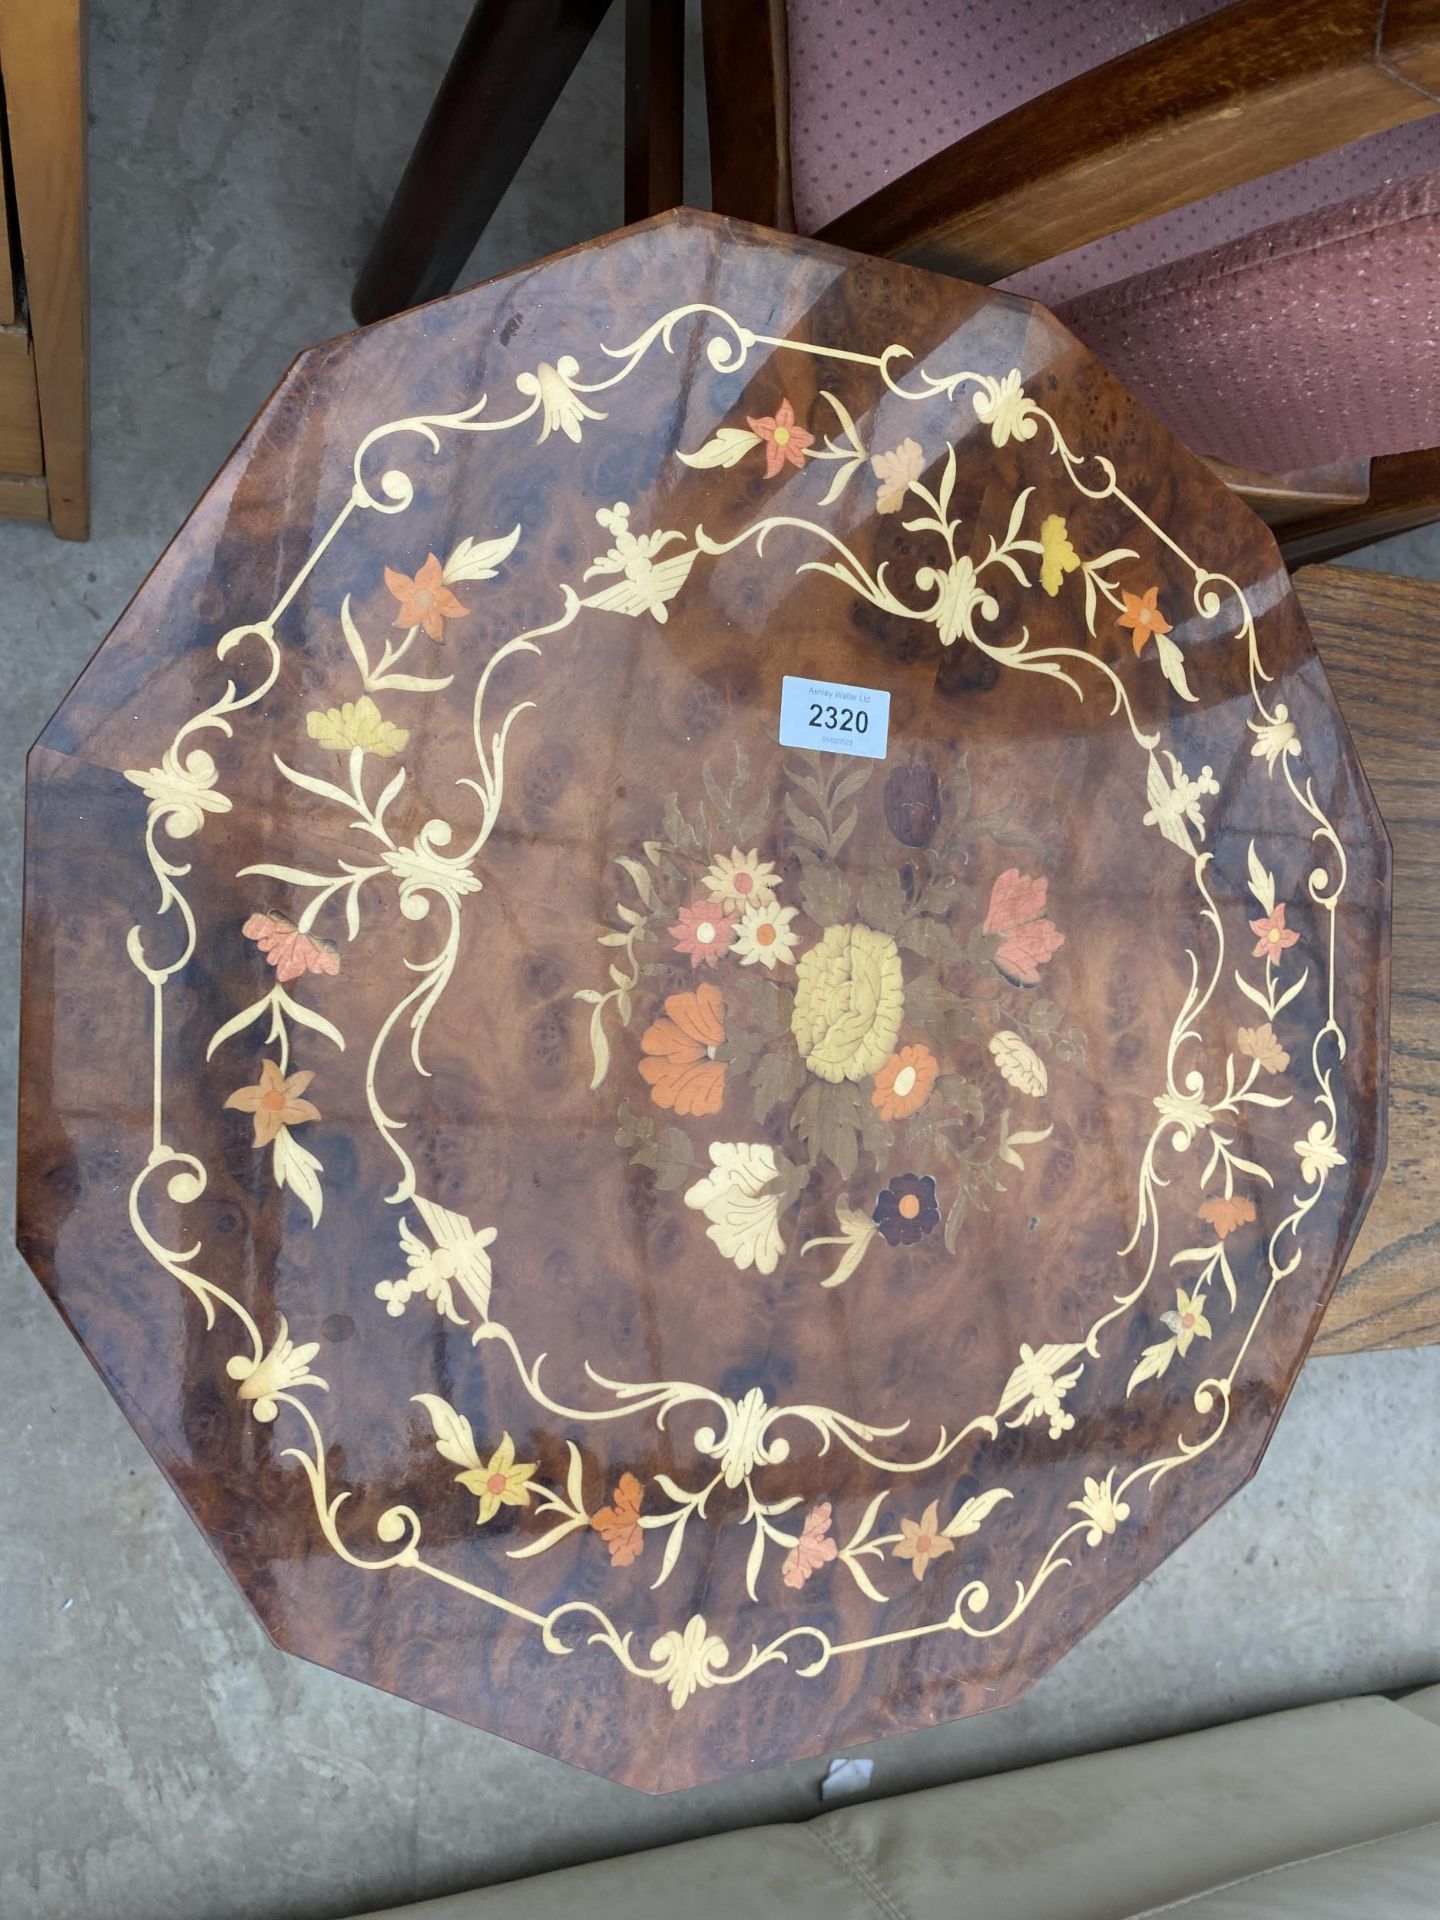 AN ITALIAN PROFUSELY INLAID MUSICAL TABLE, 19" DIAMETER - Image 2 of 2